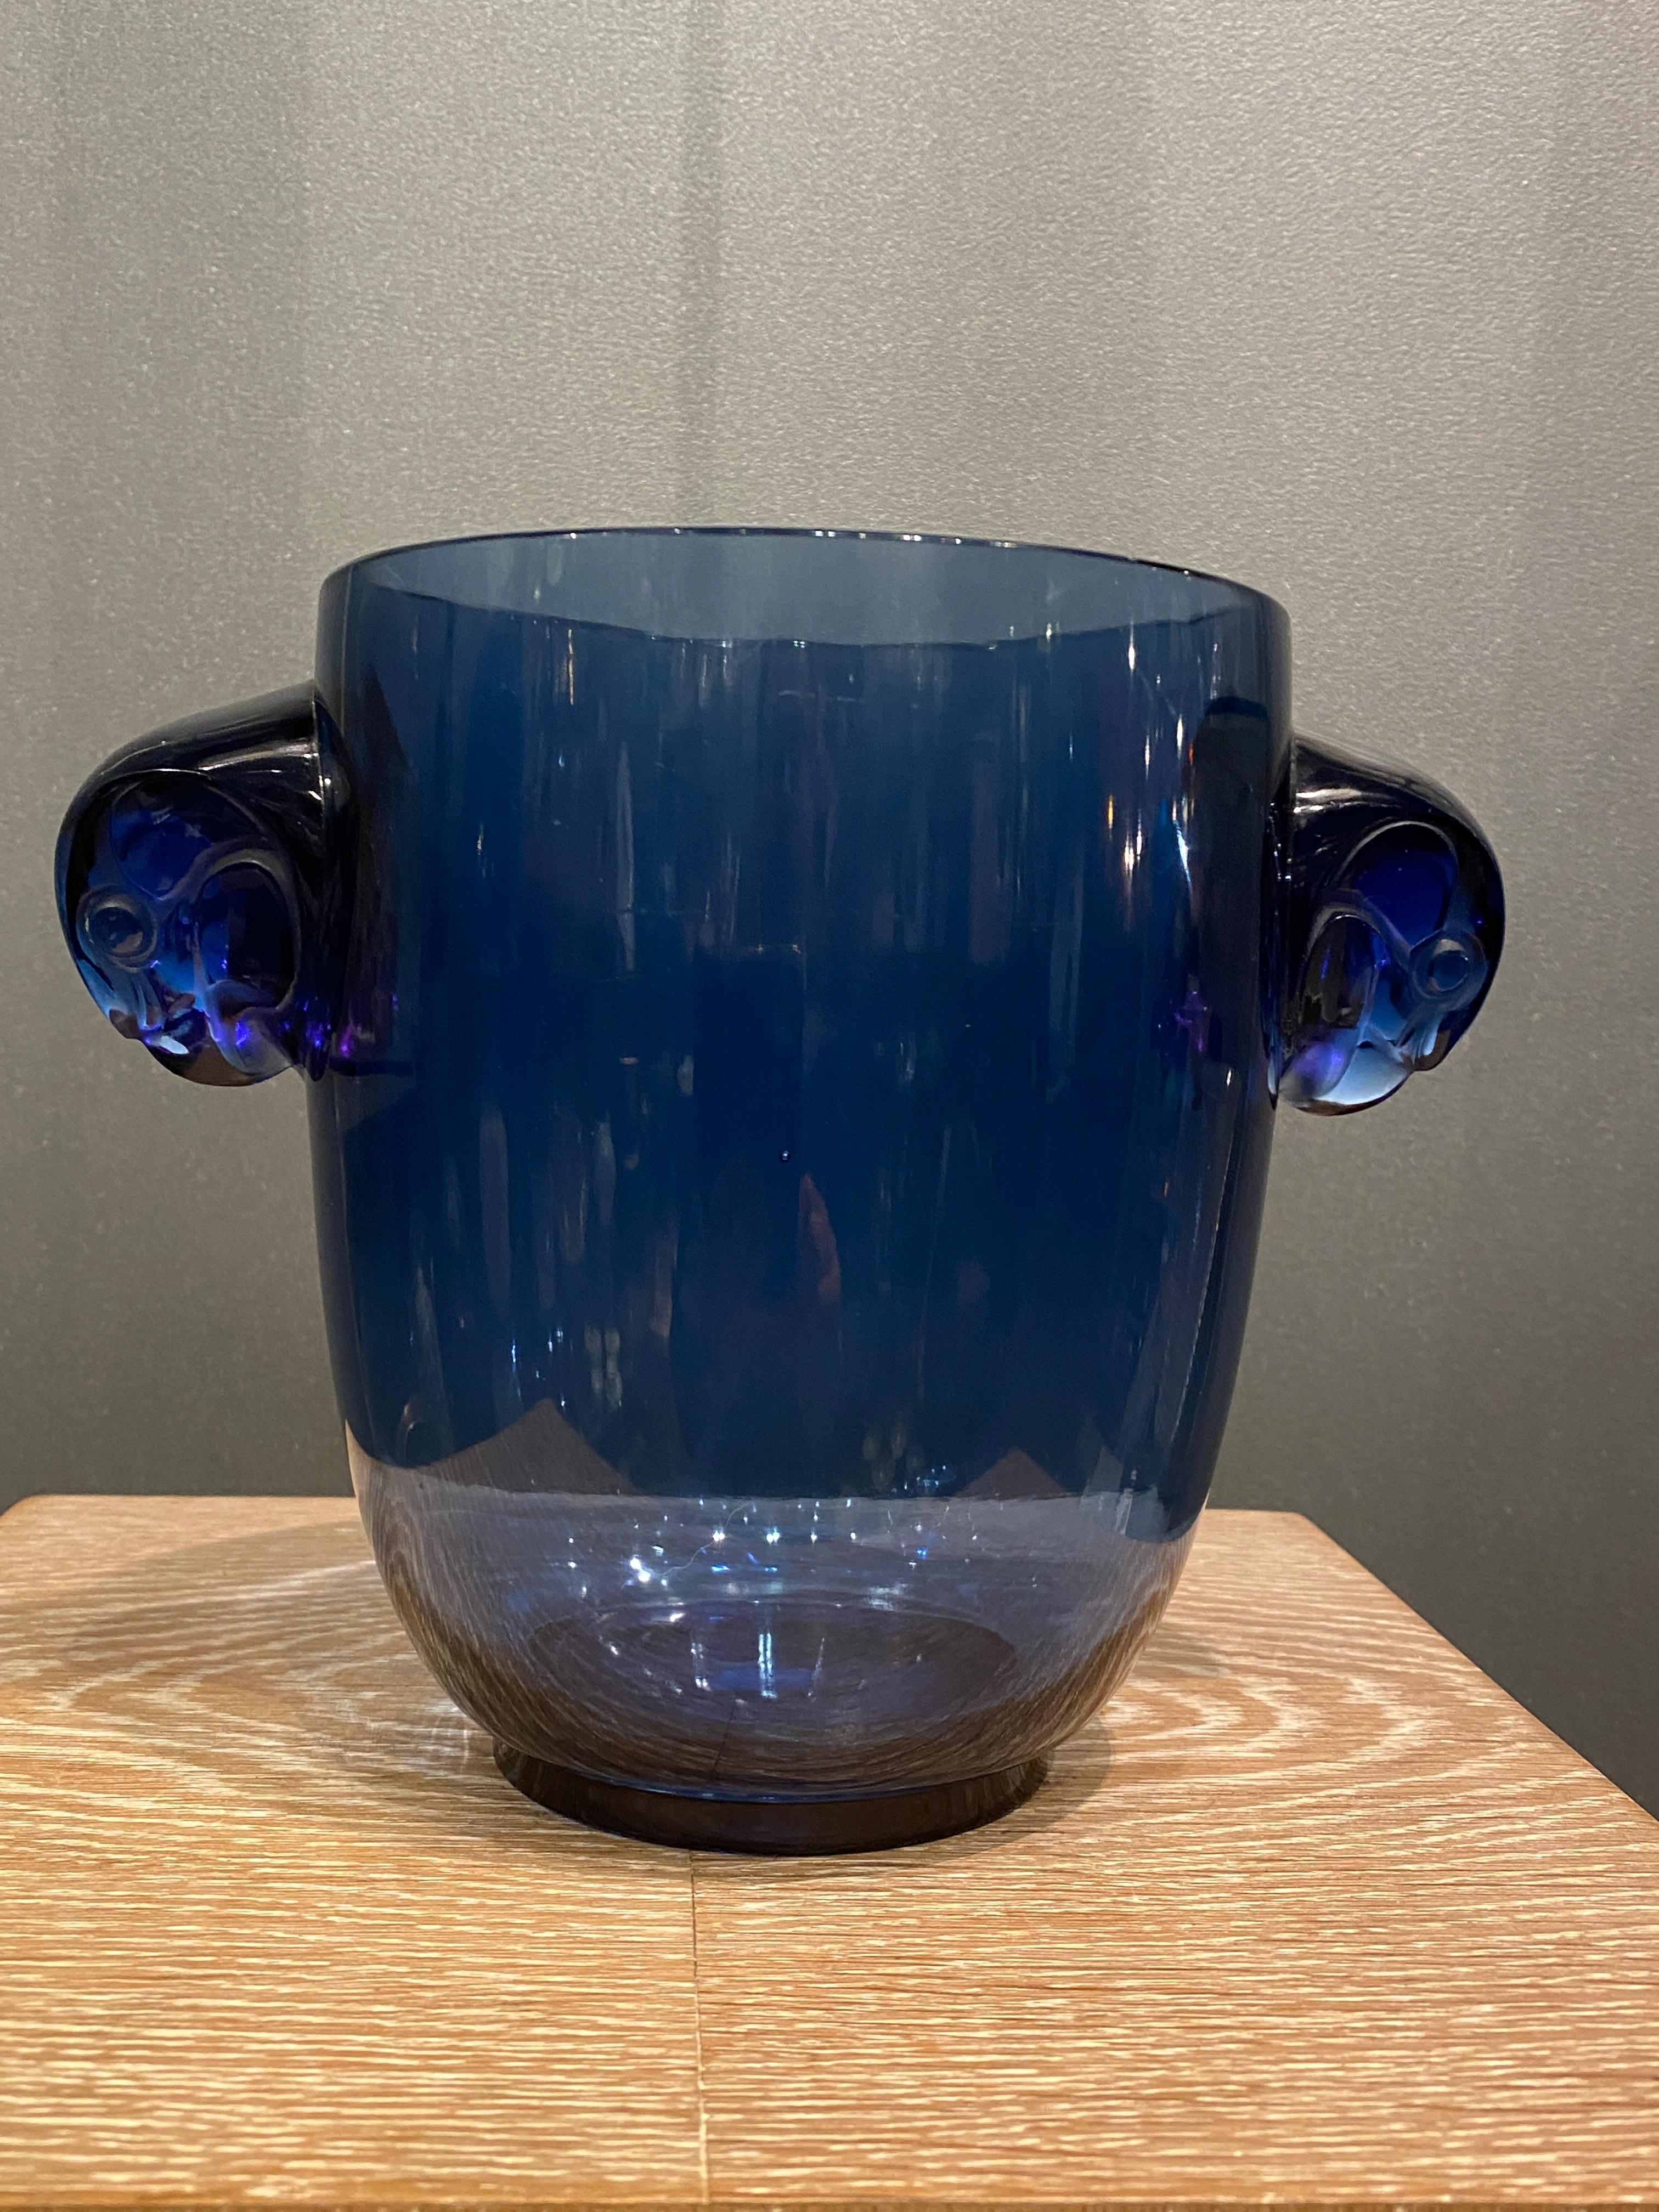 The colored glass of Lalique is world famous and much looked for.

After launching the collection is white glass, Lalique turned to colored glass to compete with manufactures like Daum who used strong colored glass in the Art Deco period.

This